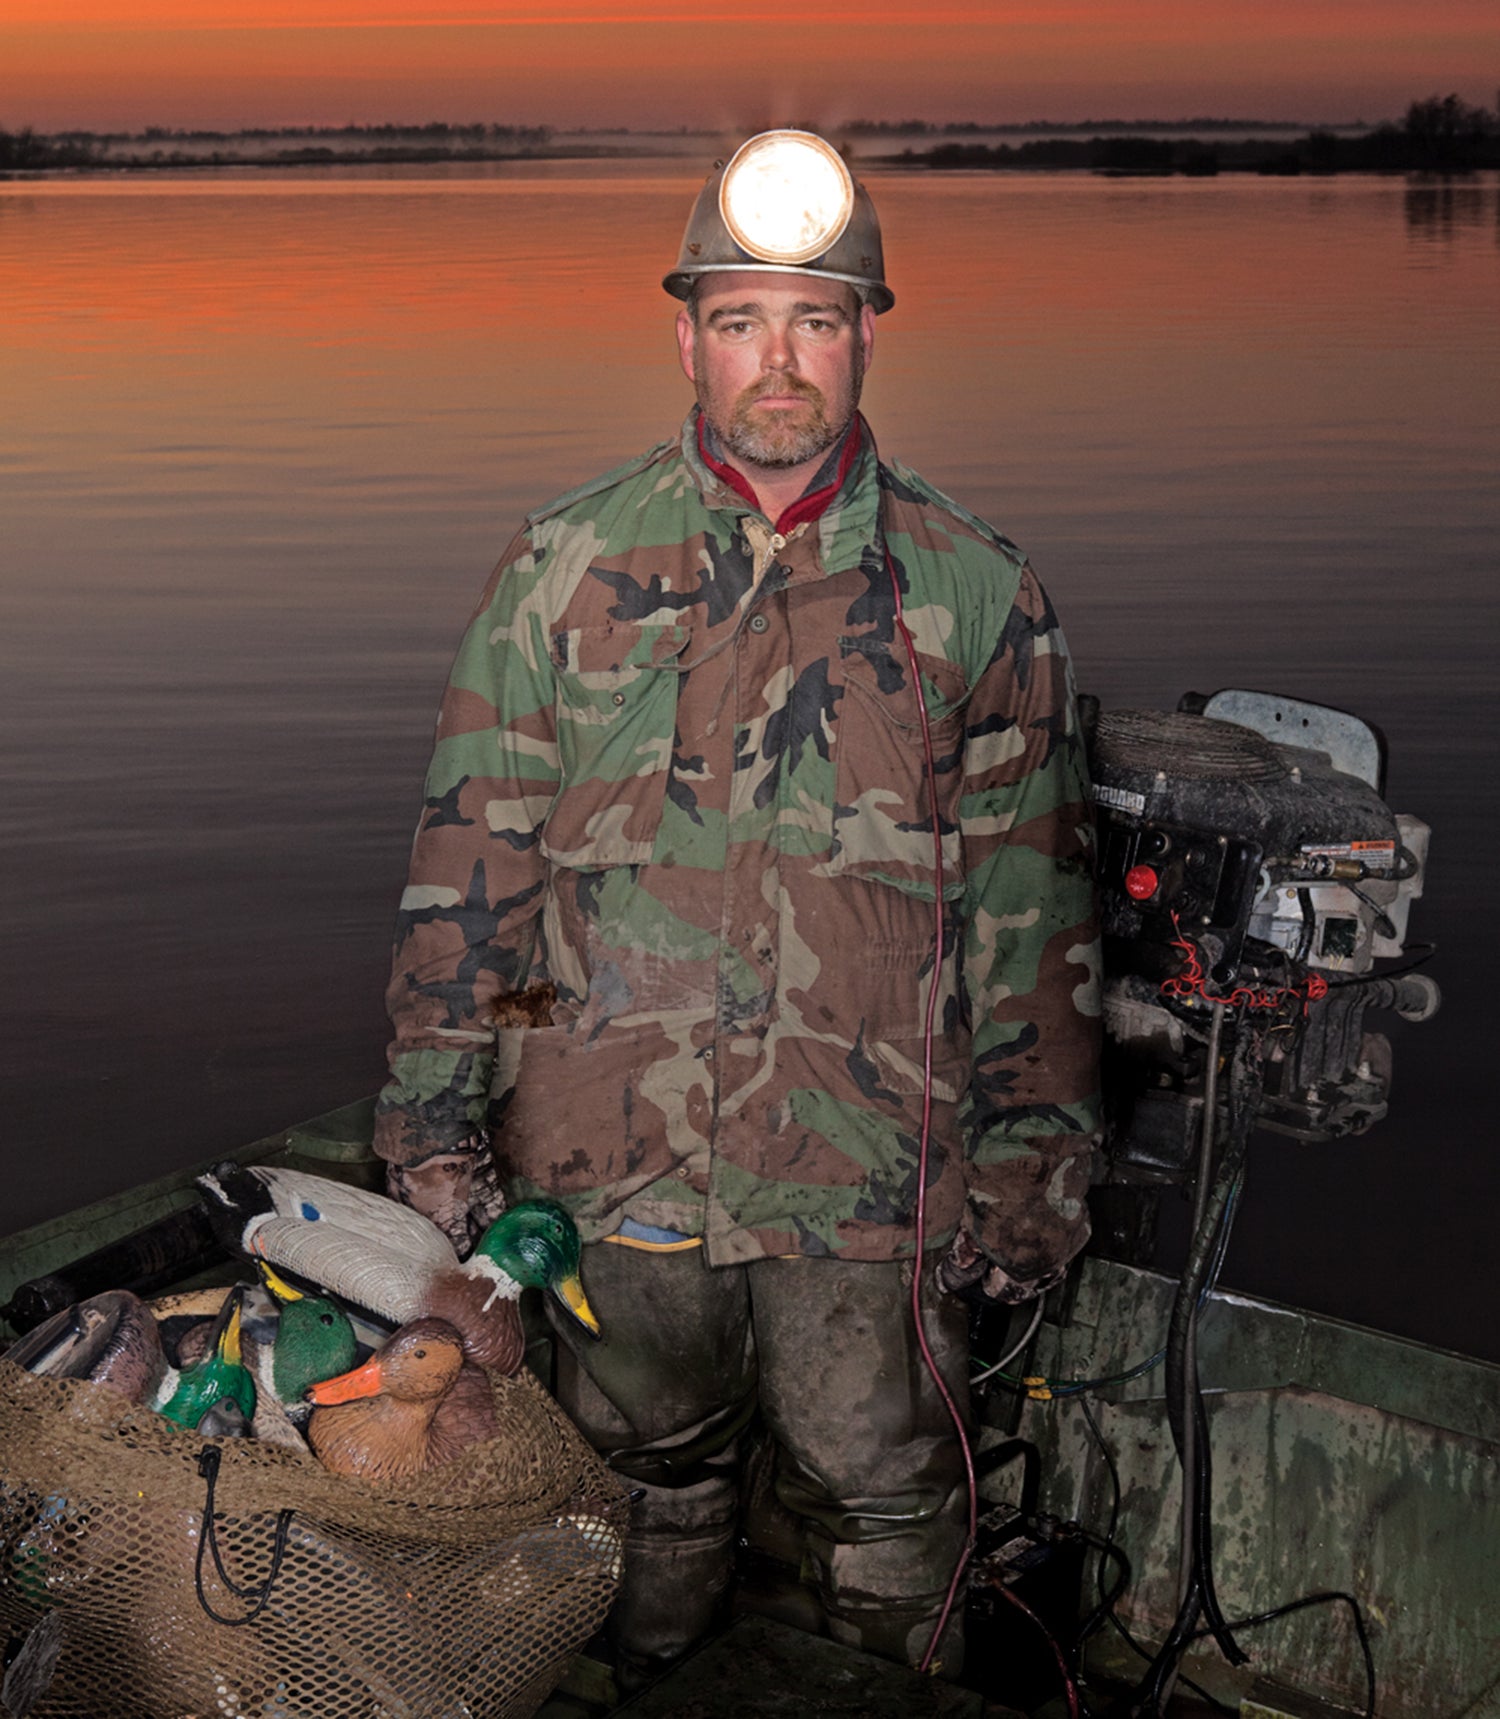 man in camp with large headlamp stands on boat and holds big bag of duck decoys